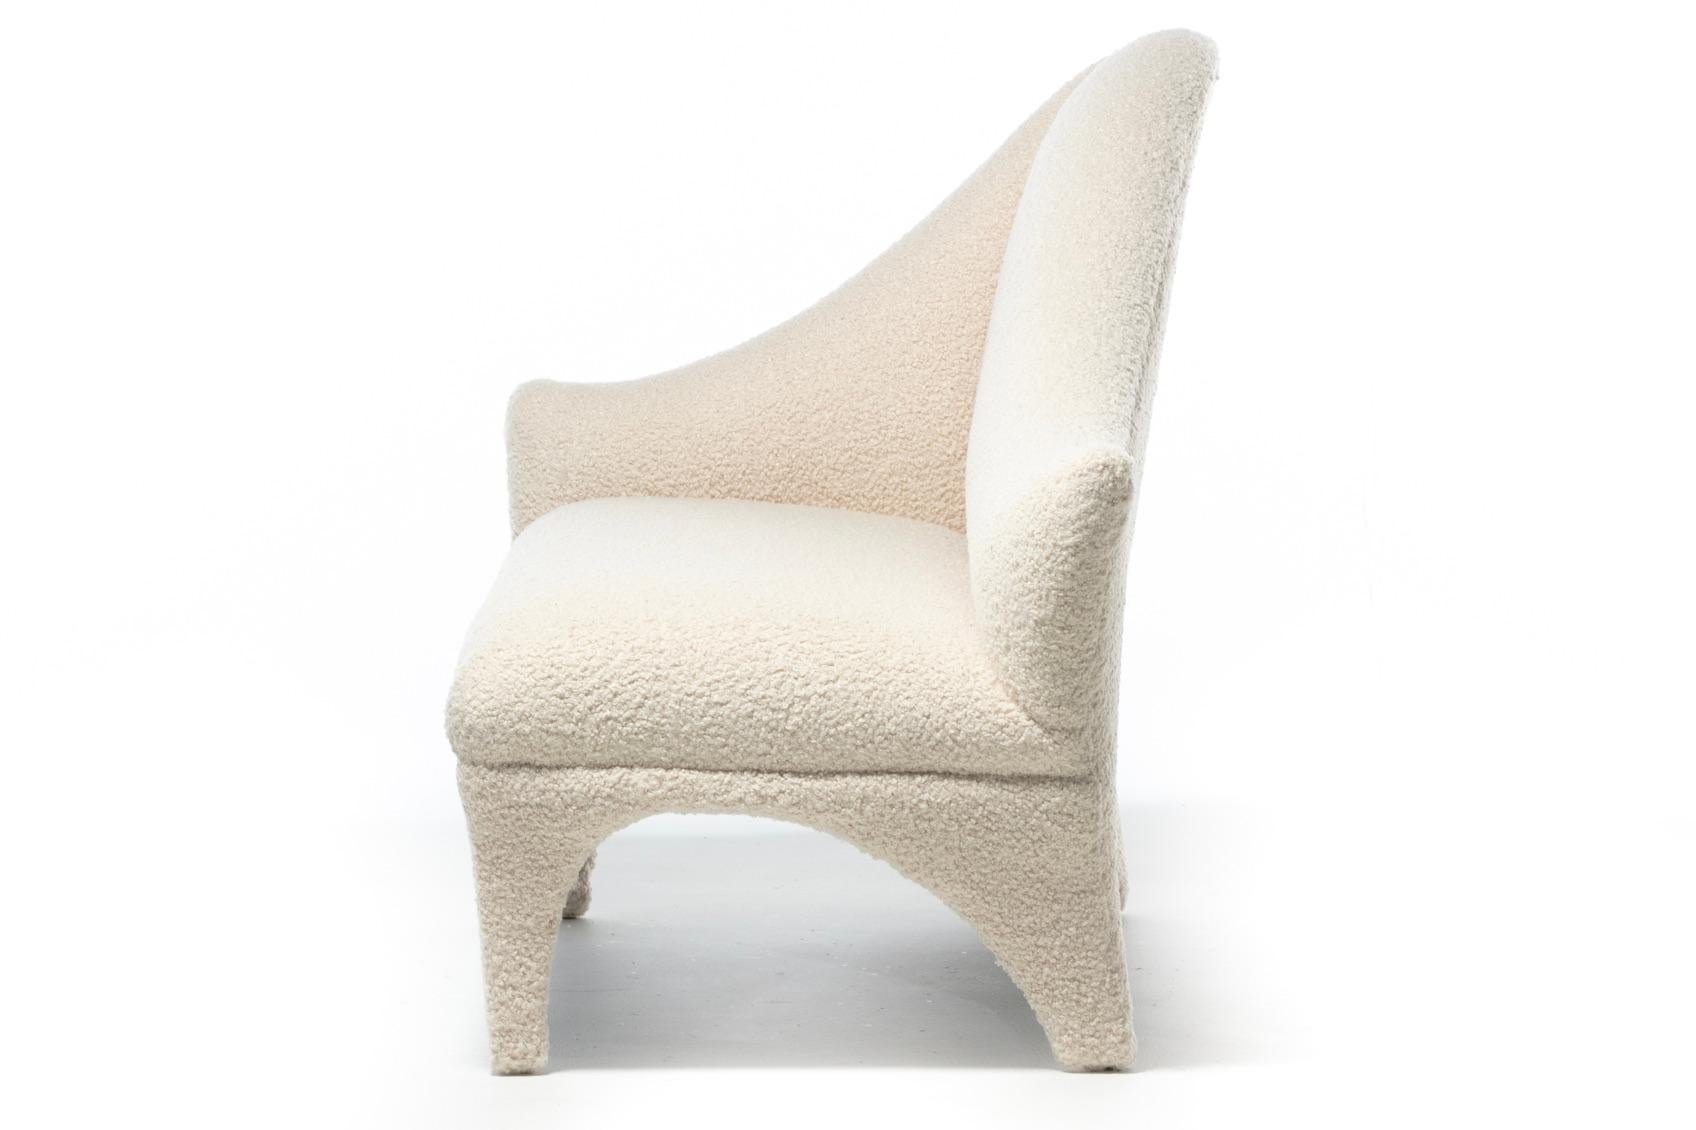 Late 20th Century Vladimir Kagan A-Symmetric Settee in Ivory Bouclé by Directional, c. 1991 For Sale